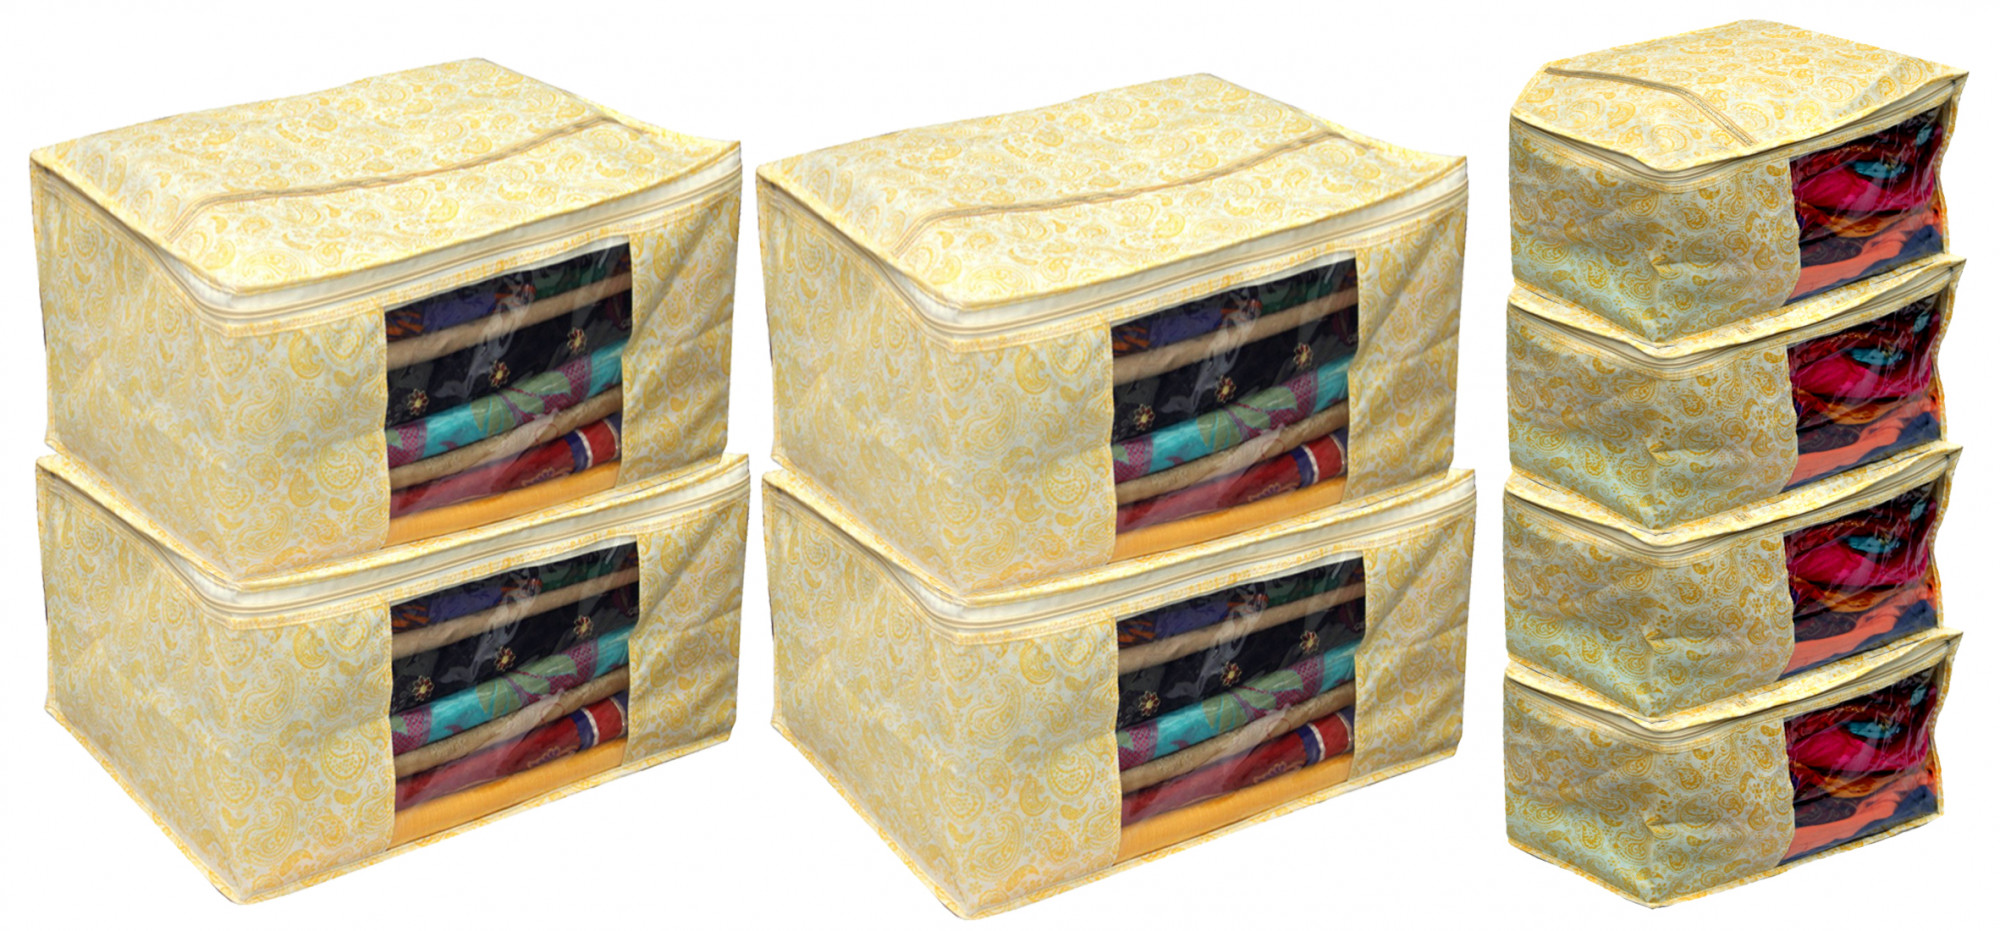 Kuber Industries Leaf Design Non Woven Saree Cover/Cloth Wardrobe Organizer And Blouse Cover Combo Set (Gold) -CTKTC38445